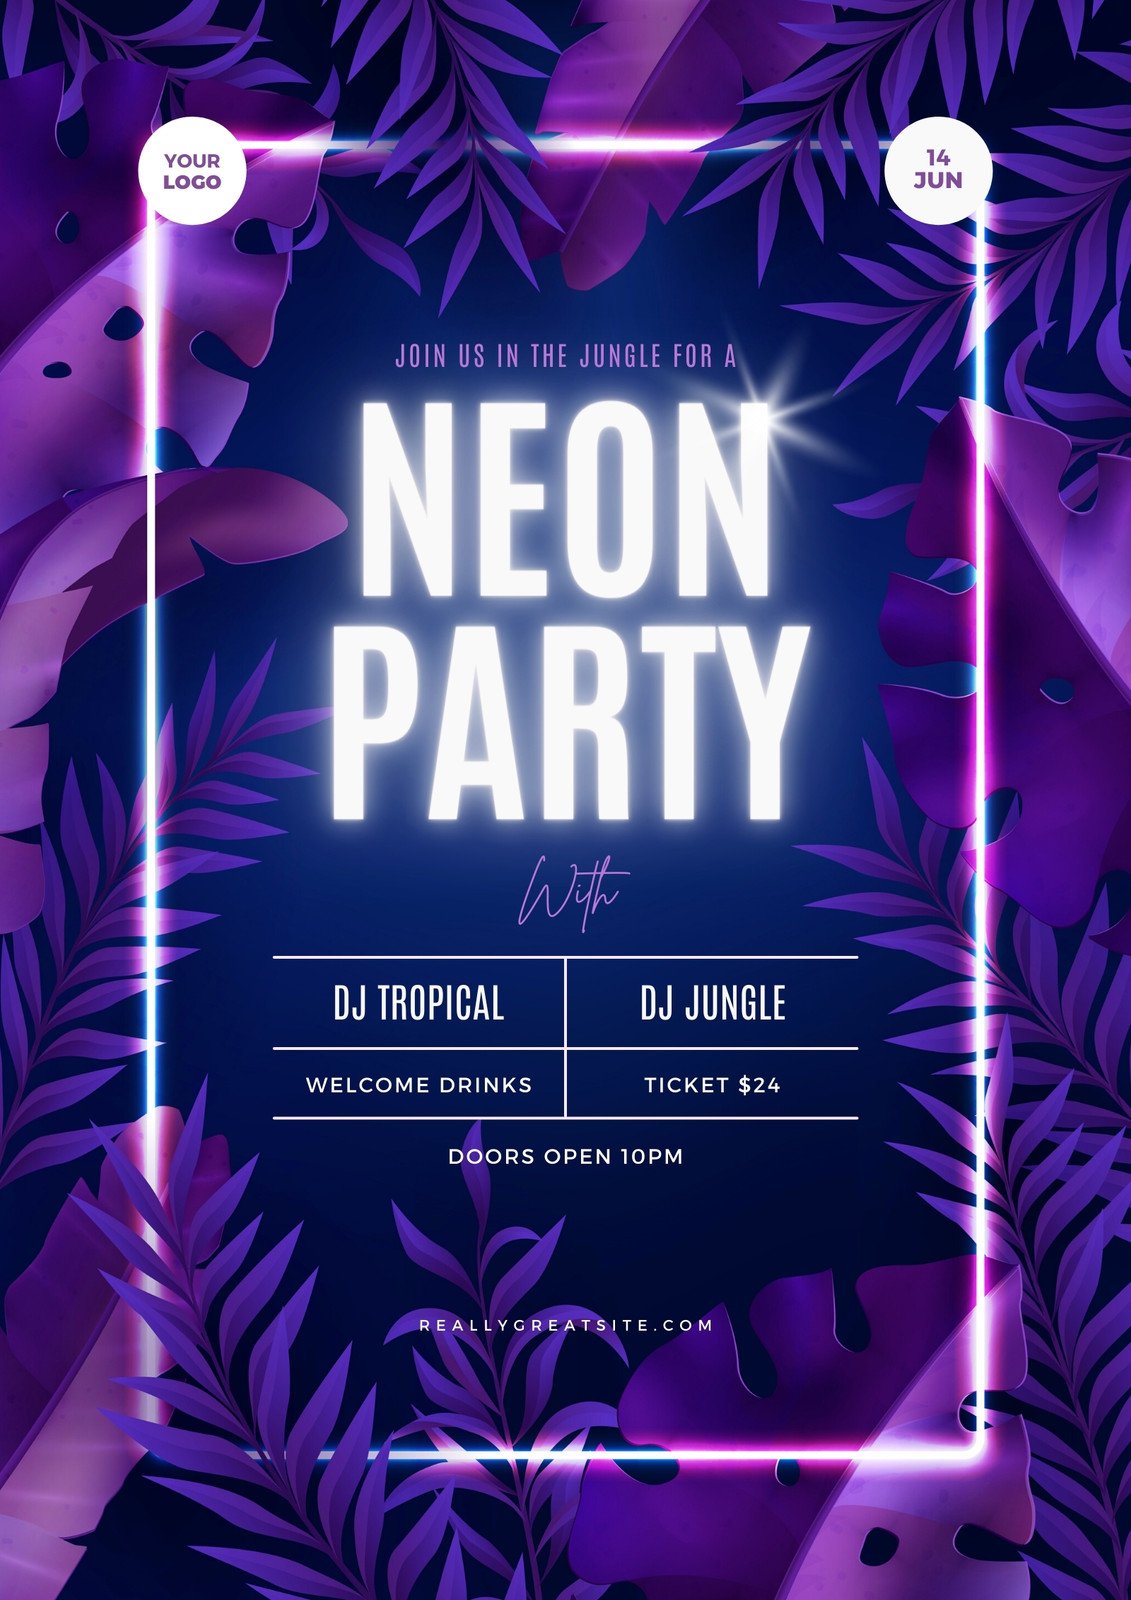 Free printable and customizable club flyer templates | Canva